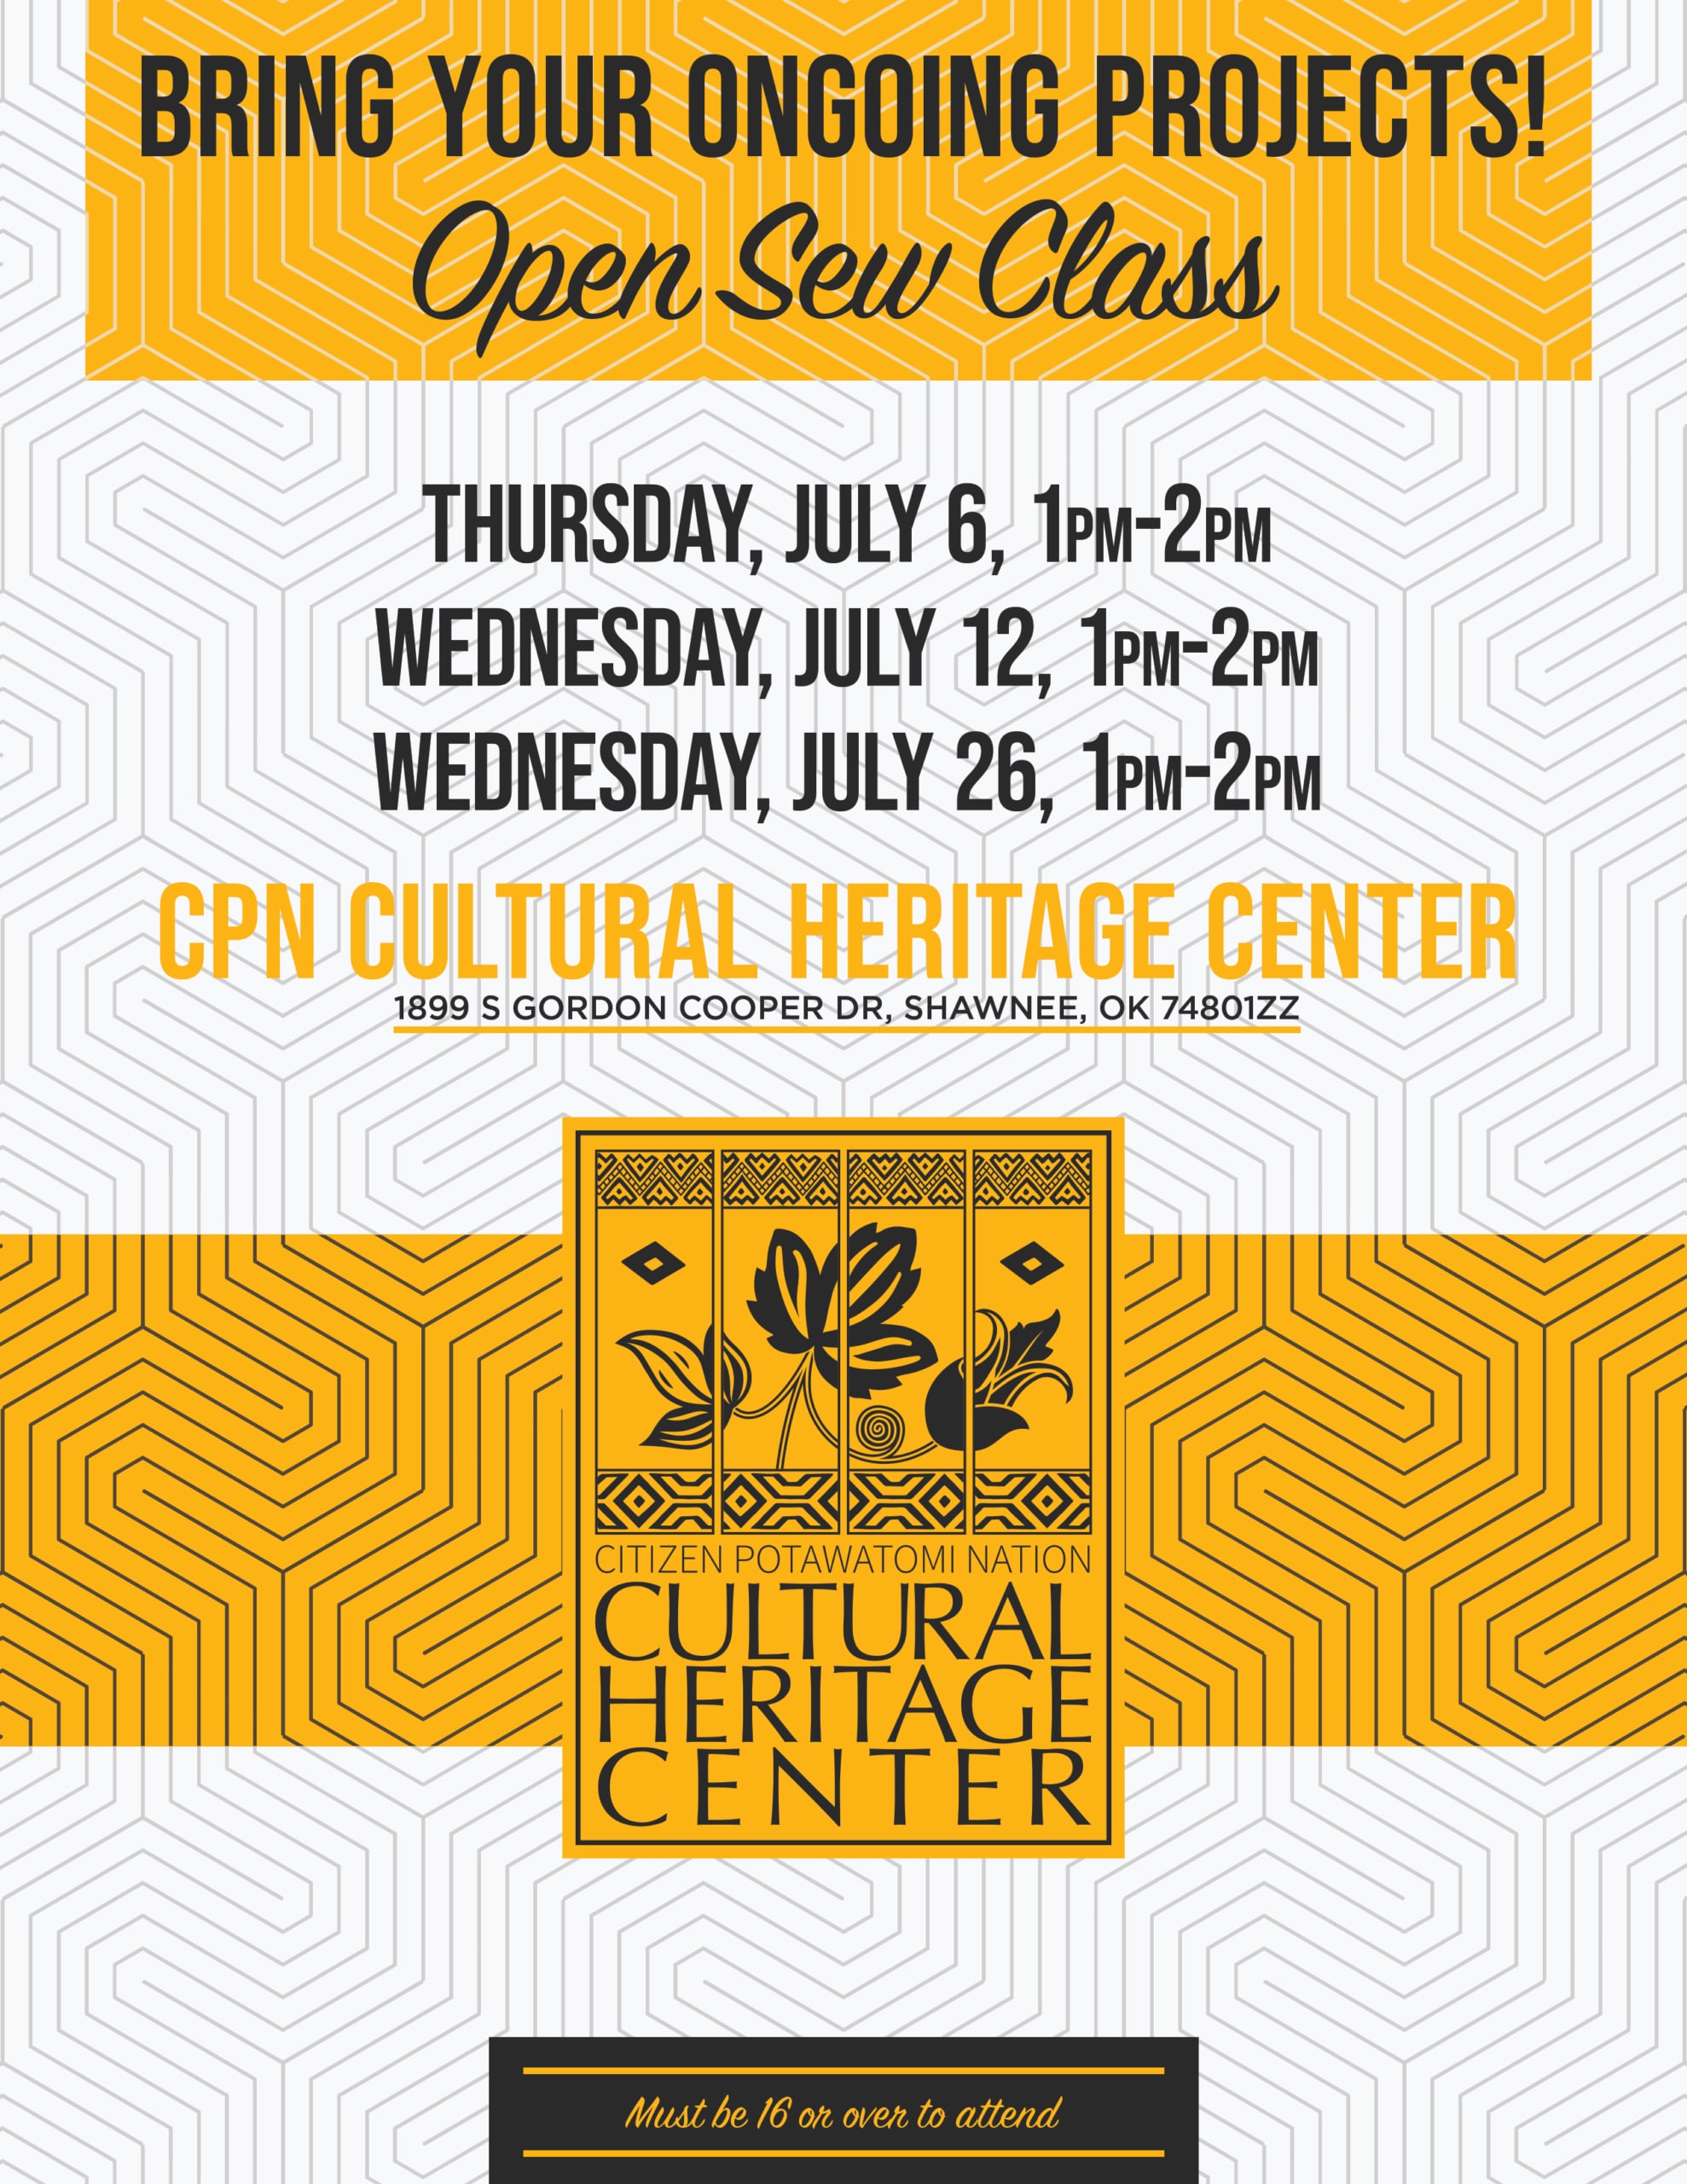 Yellow and white boxes with black geometric designs frame event details for the open sewing classes in July at the Cultural Heritage Center.